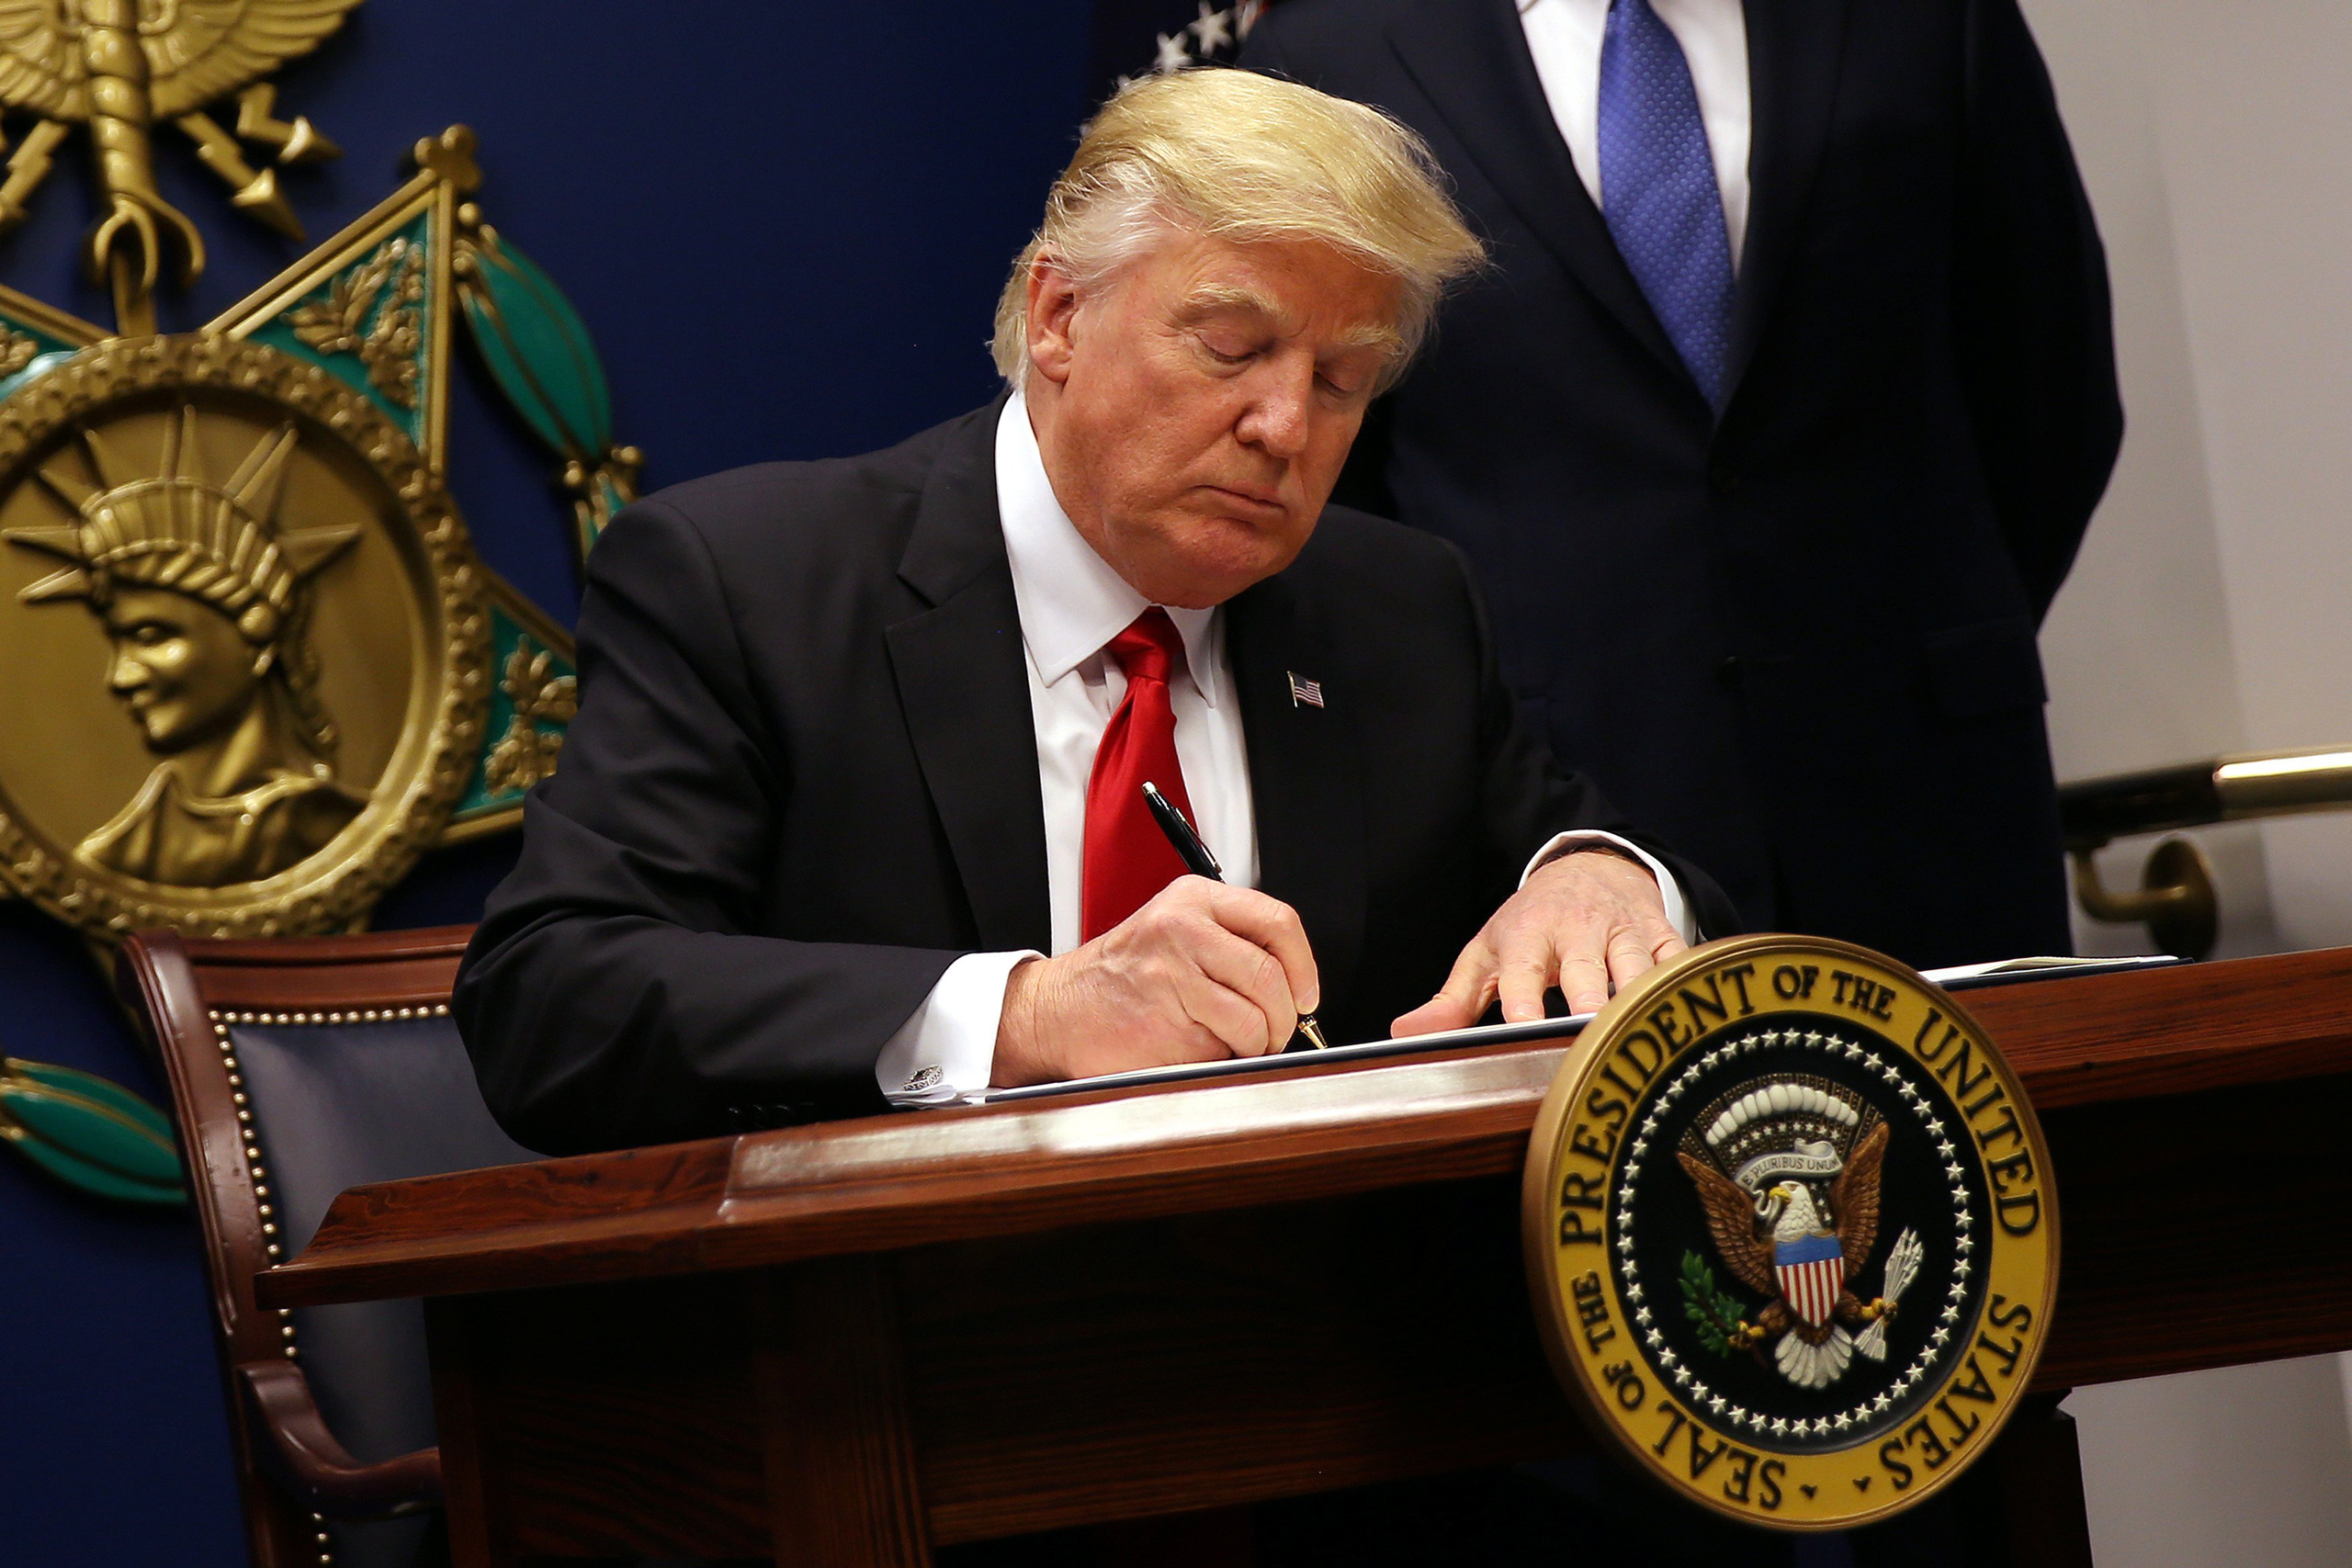 President Donald Trump signs an executive order imposing a four-month travel ban on refugees entering the United States and a 90-day hold on travelers from Syria, Iran and five other Muslim-majority countries at the Pentagon in Washington, on Jan. 27, 2017. (Carlos Barria—Reuters)